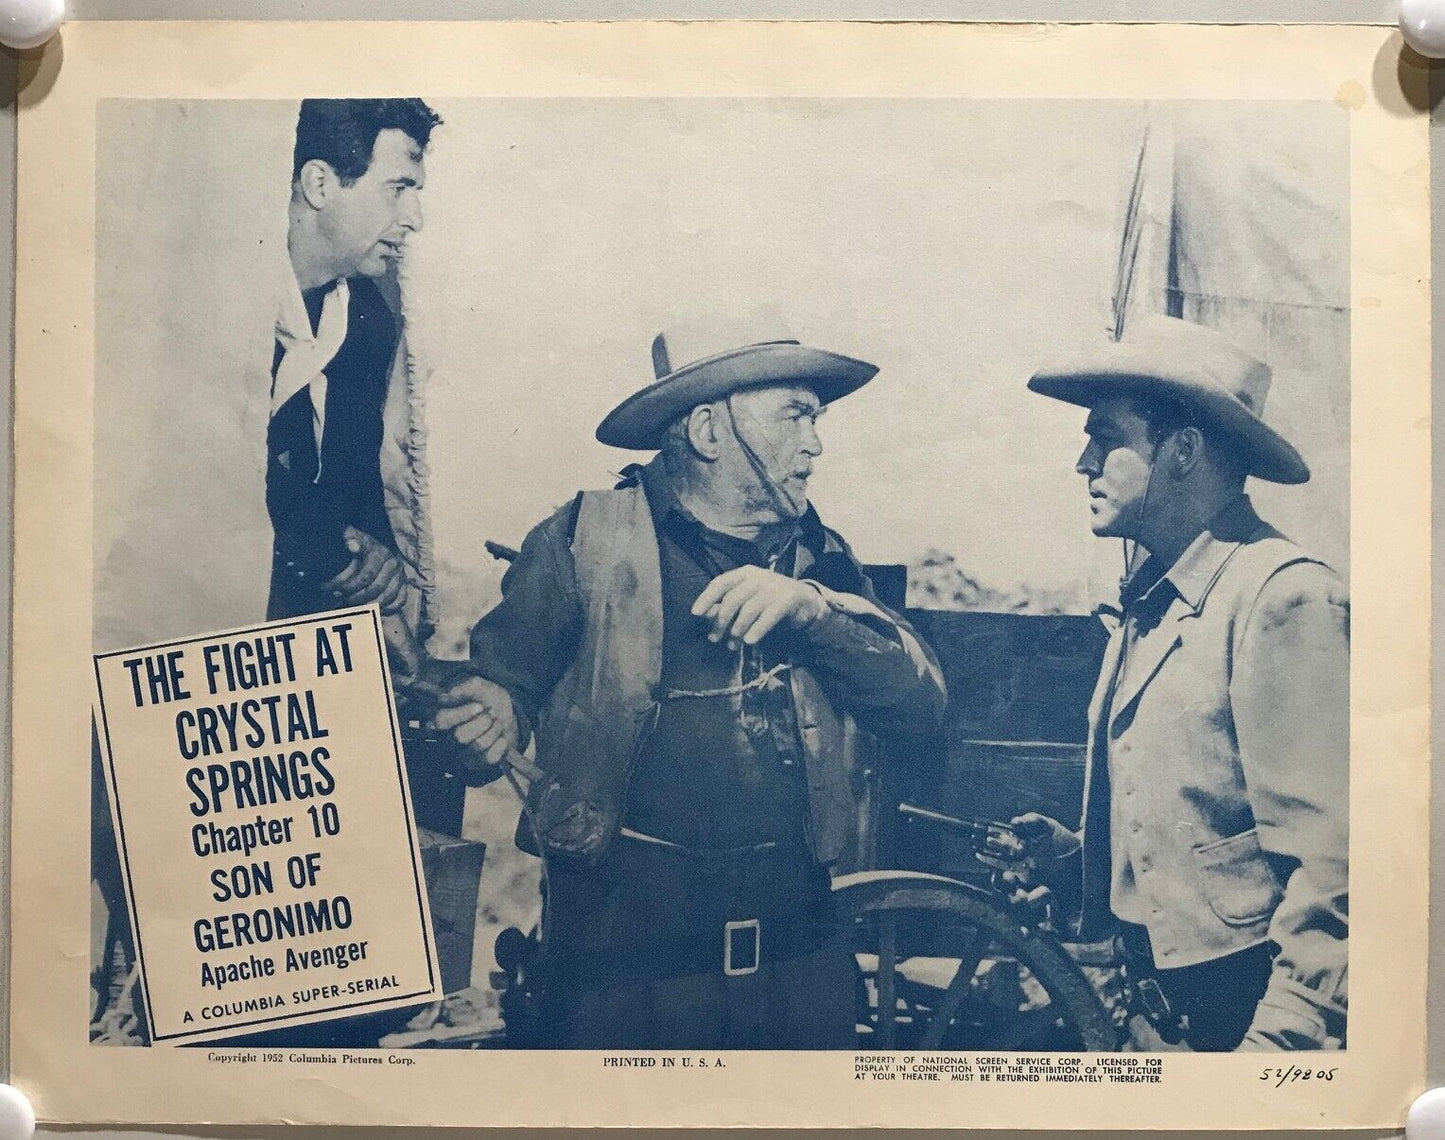 ORIGINAL SERIAL LOBBY CARD - SON OF GERONIMO (e) - 1952 - Ch 10 "The Fight at...